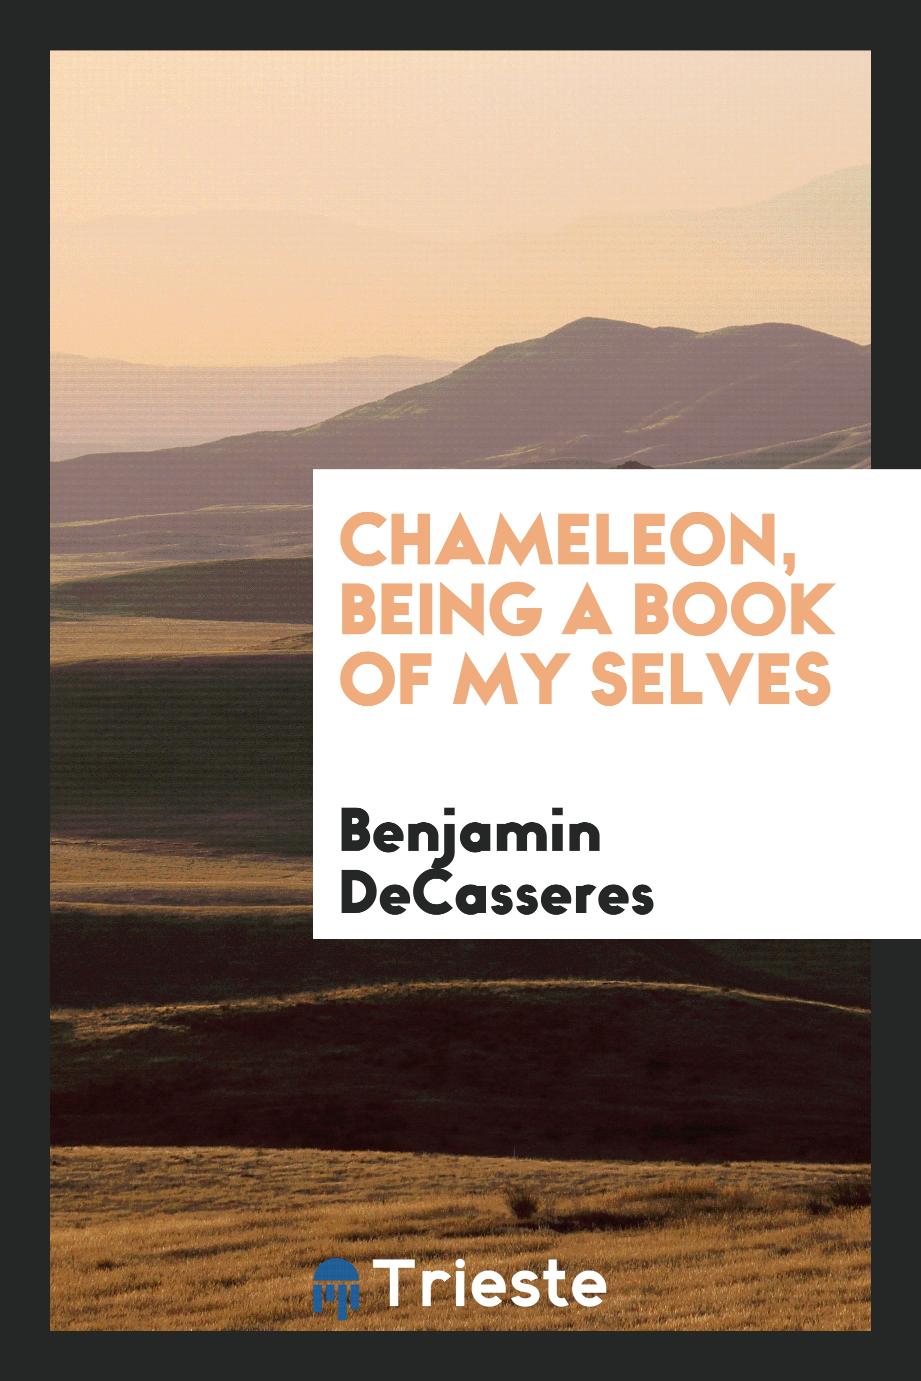 Chameleon, being a book of my selves